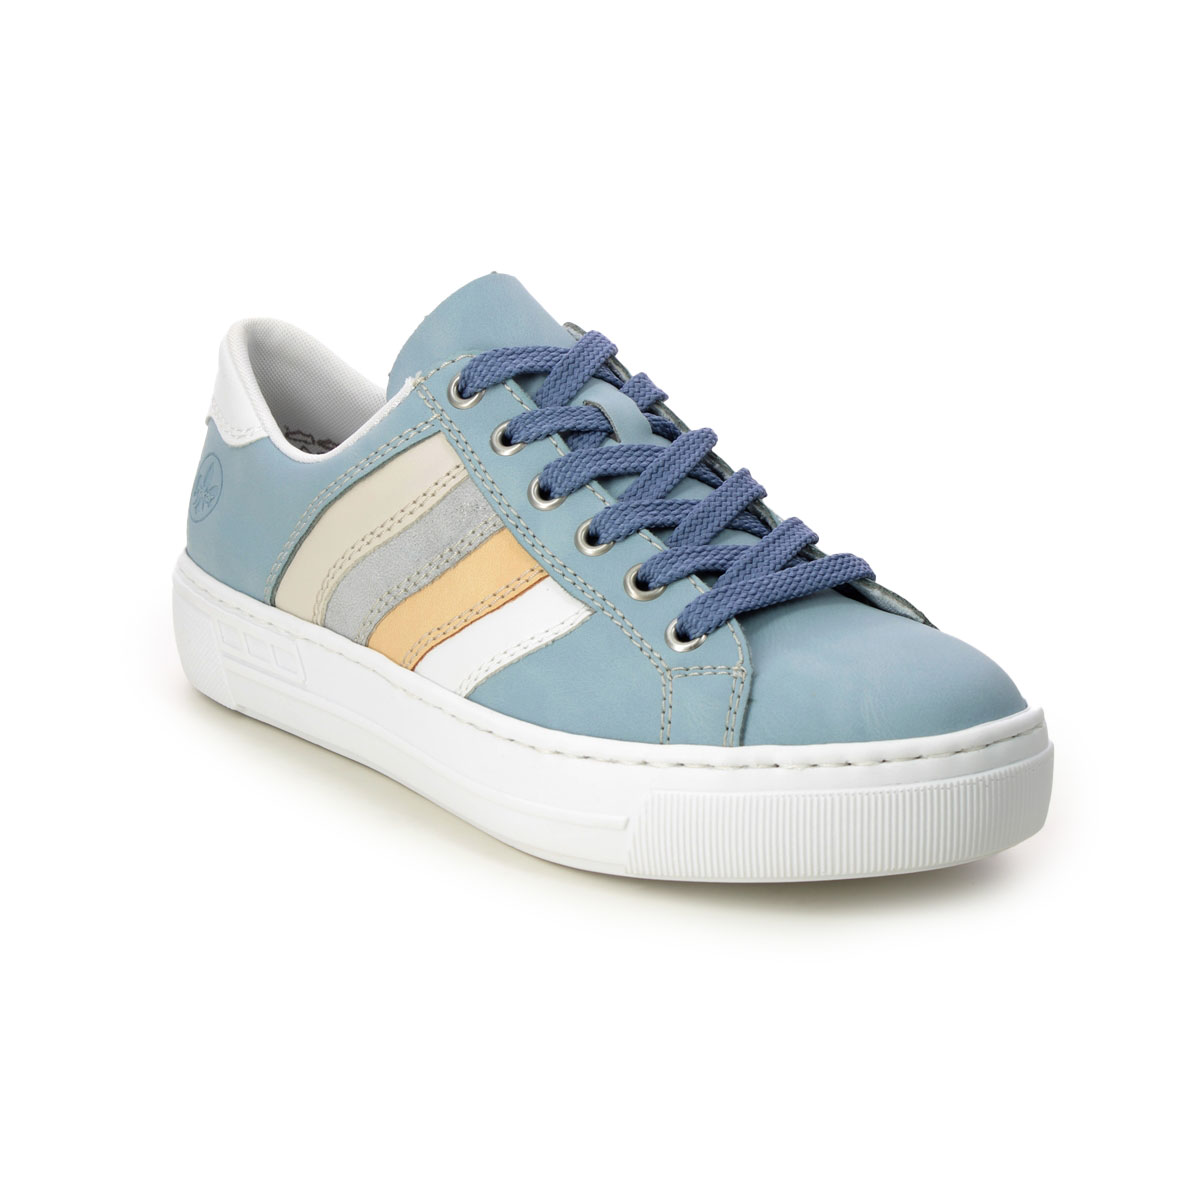 Rieker L8802-10 Blue Womens trainers in a Plain Man-made in Size 38